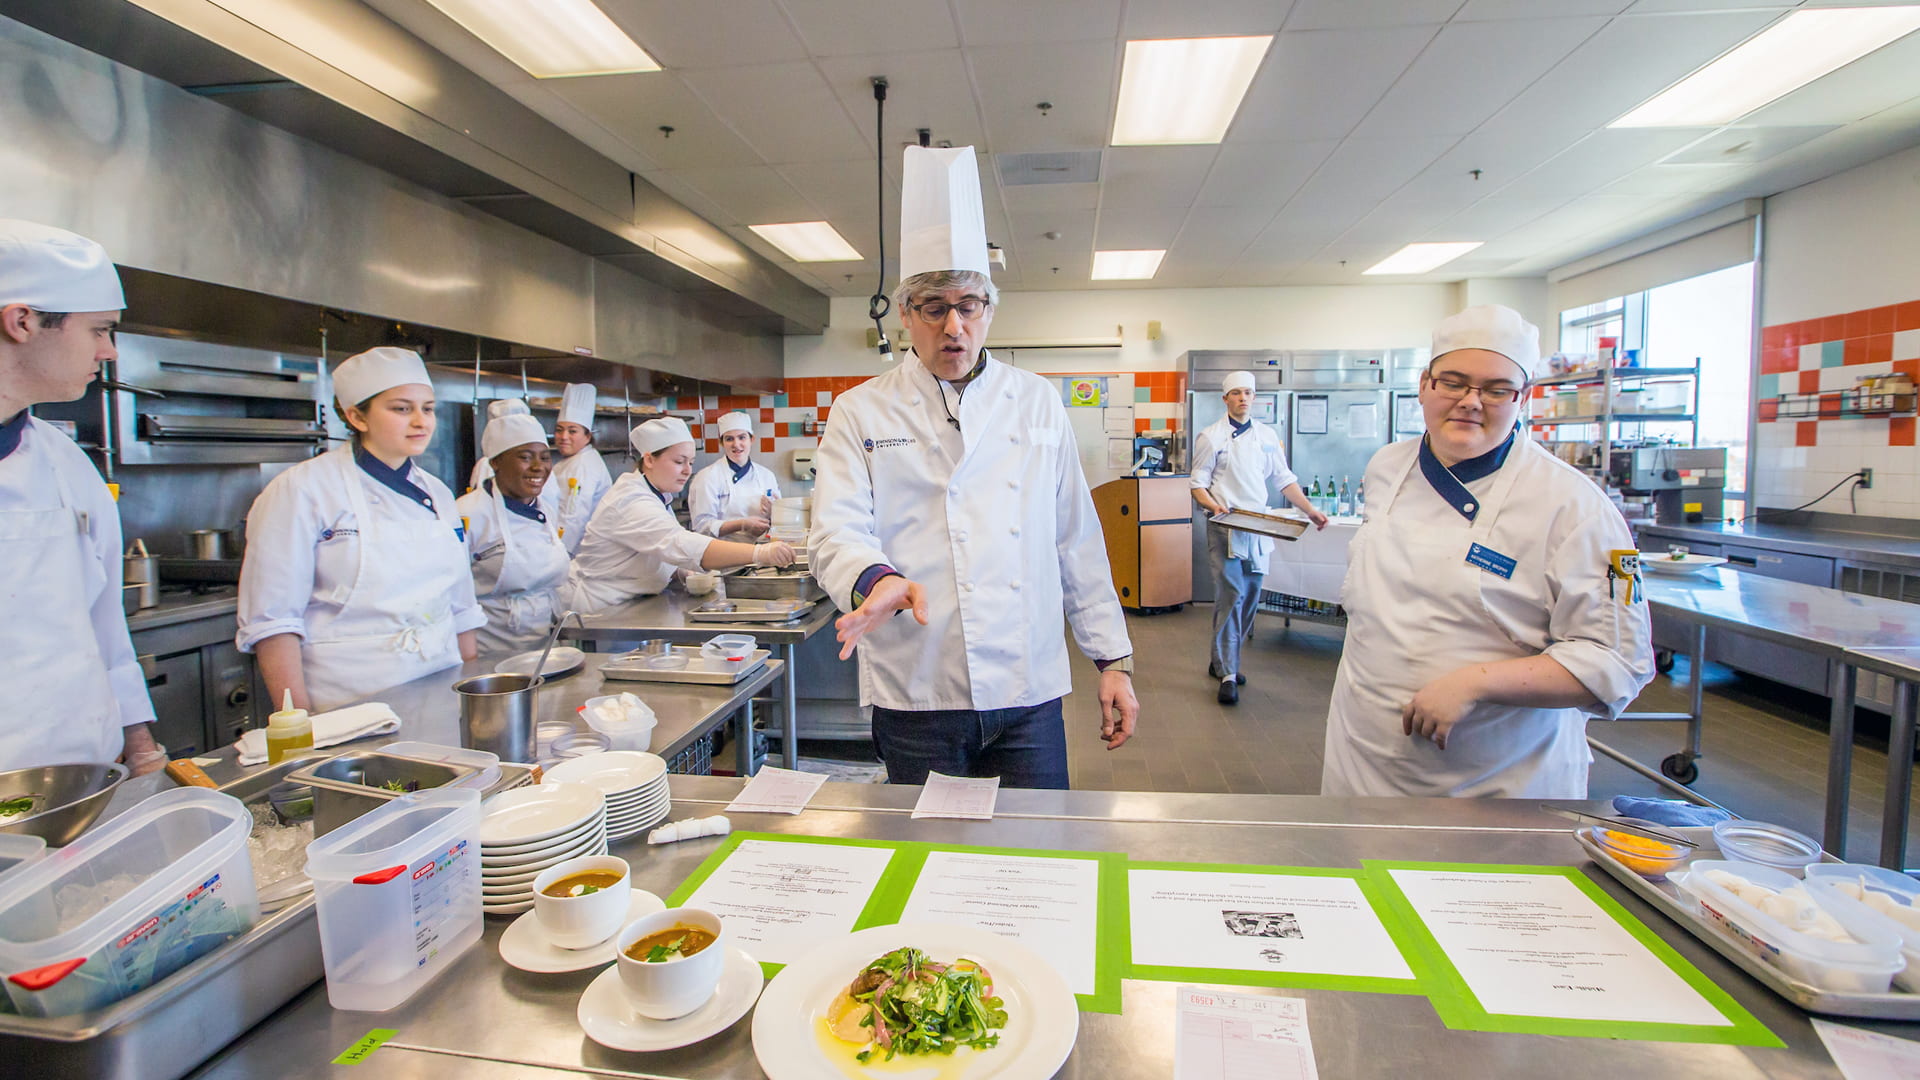 Mo Rocca with JWU students in a culinary lab